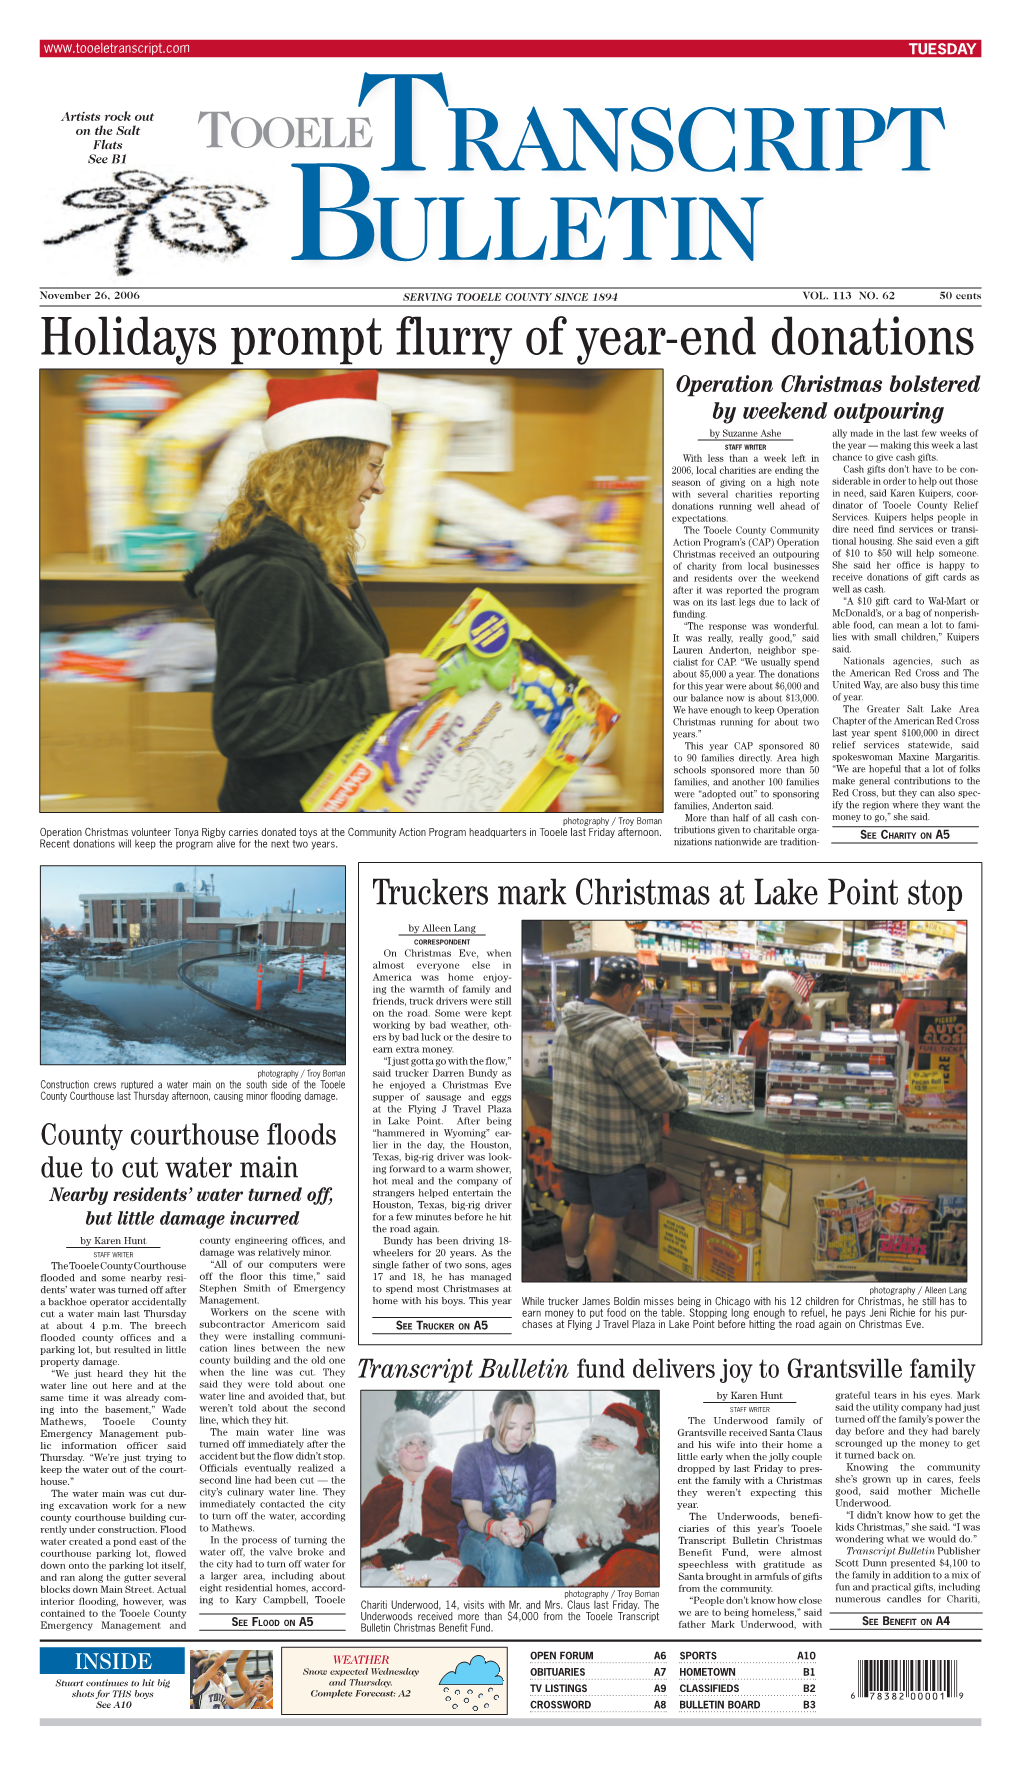 A1, A4, A5, A7 12-26-06 Front Page